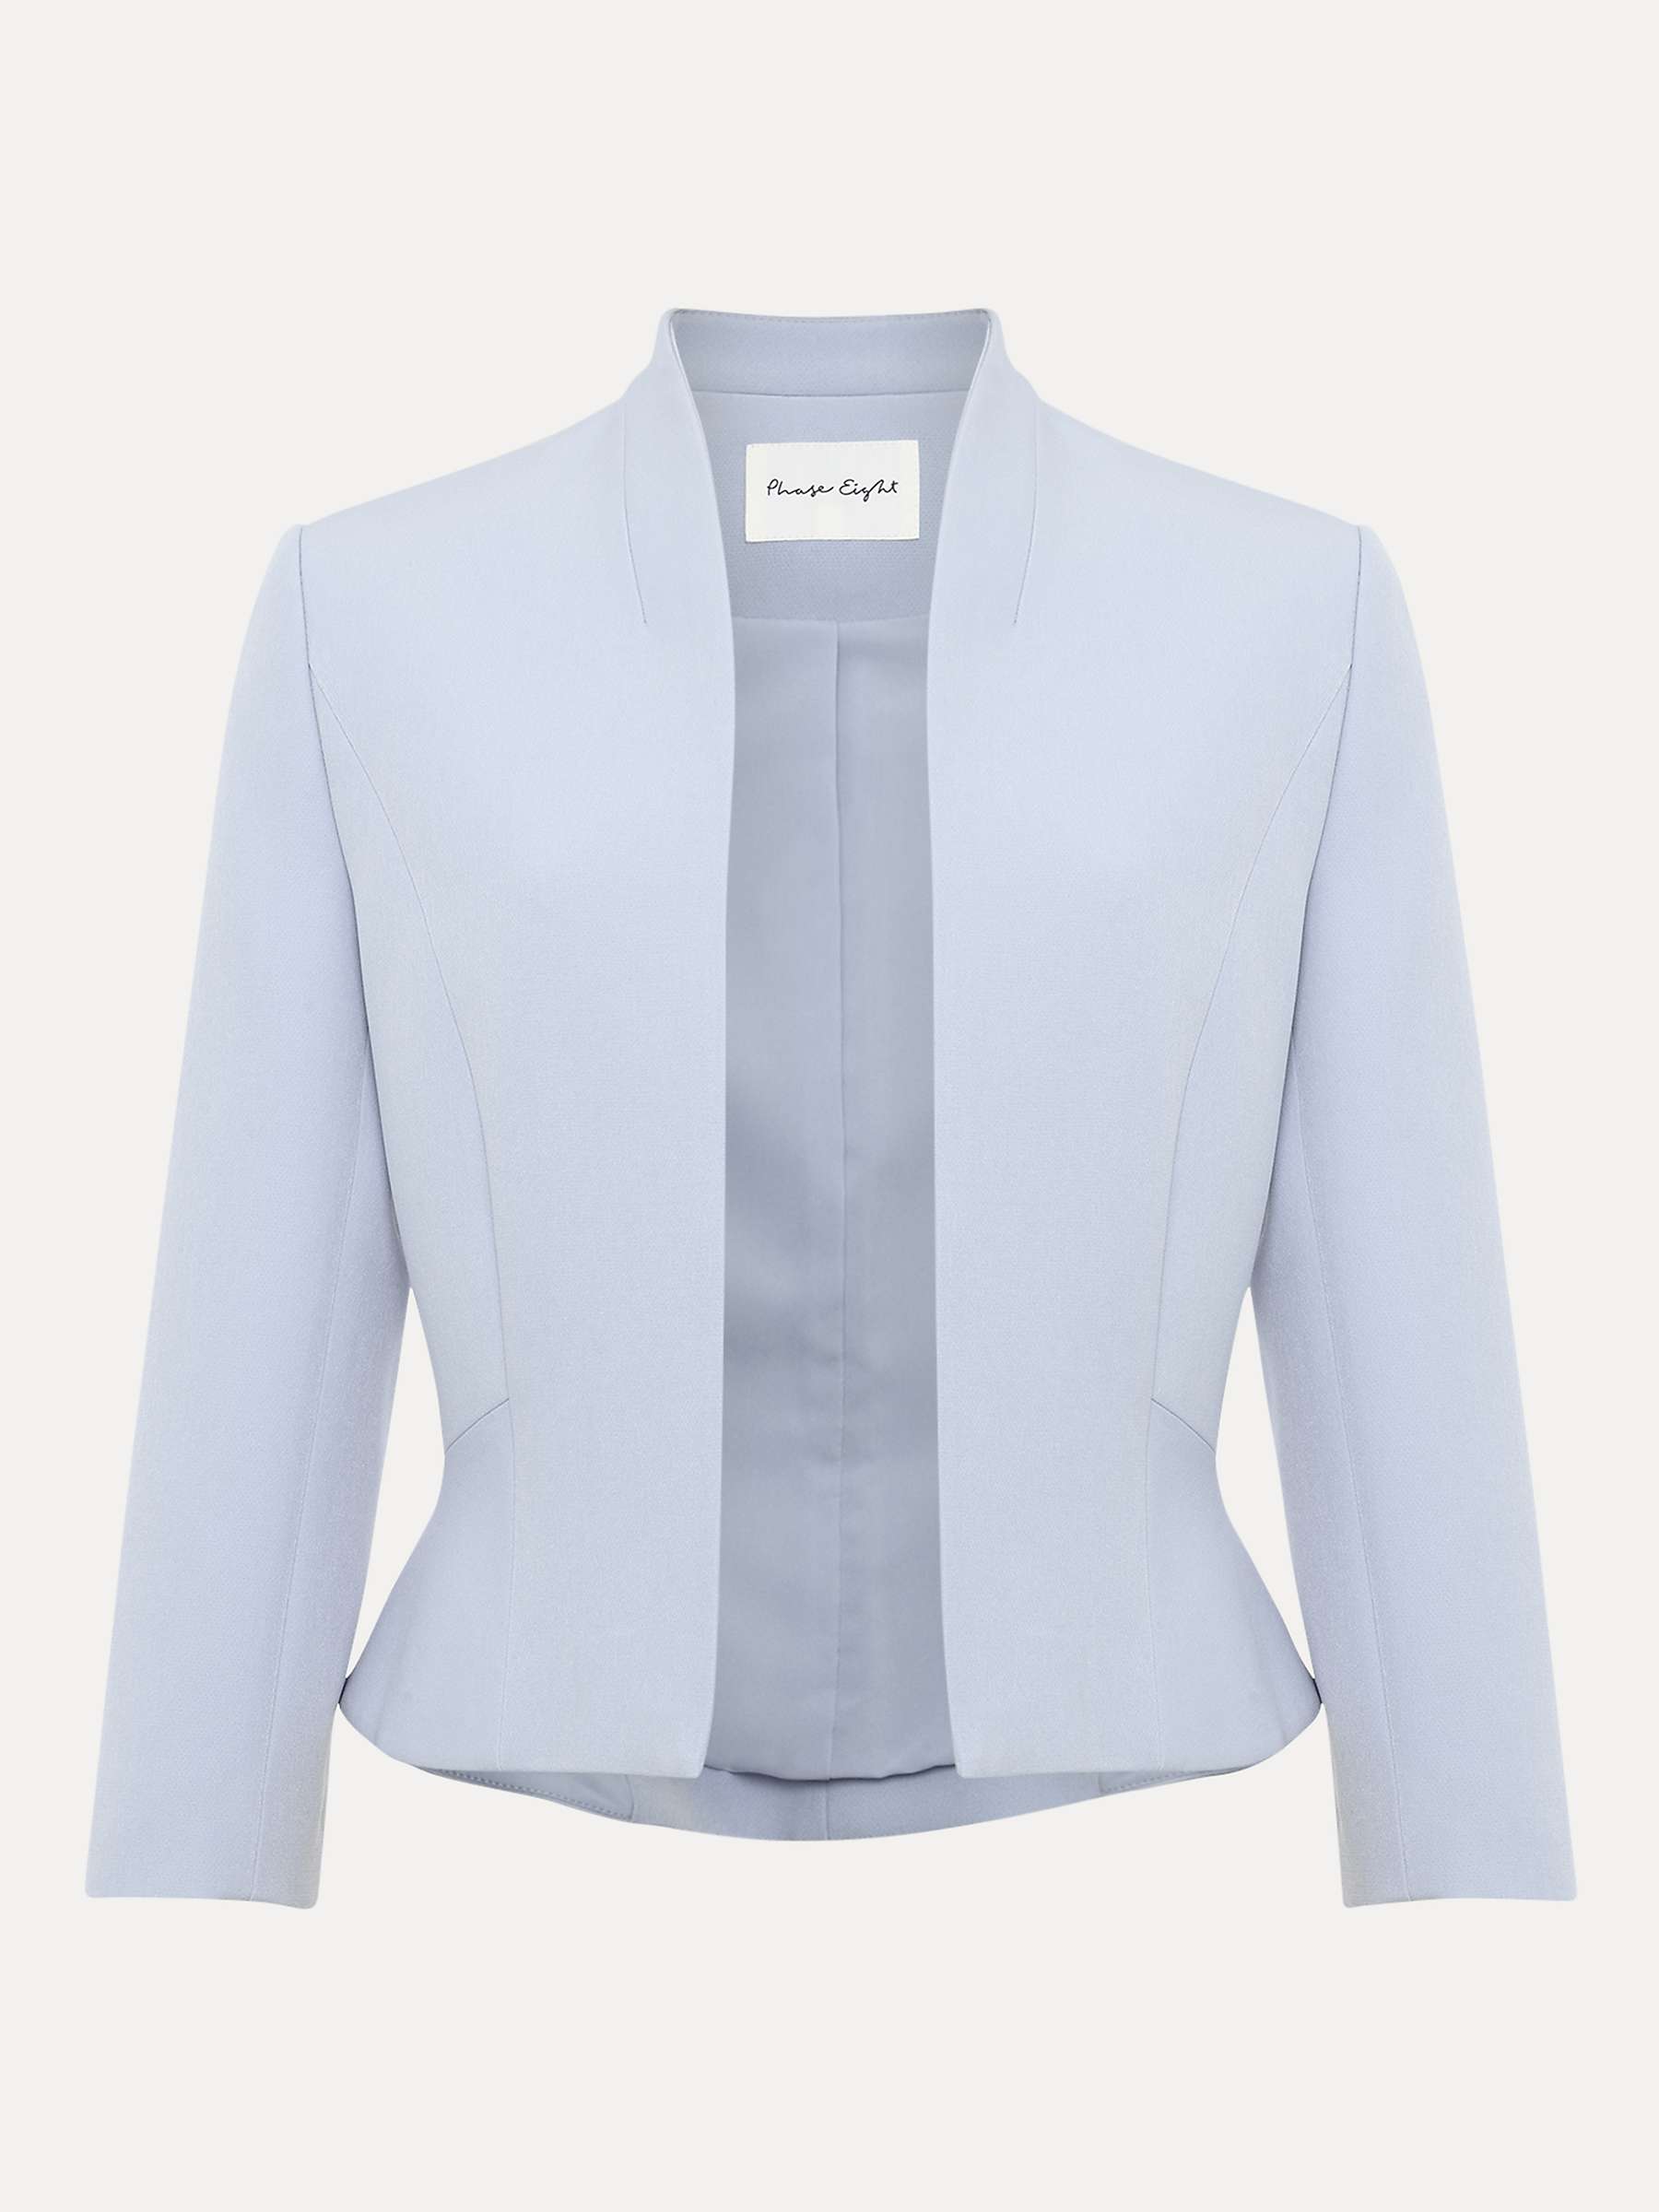 Buy Phase Eight Daisy Fitted Peplum Jacket, Pale Blue Online at johnlewis.com